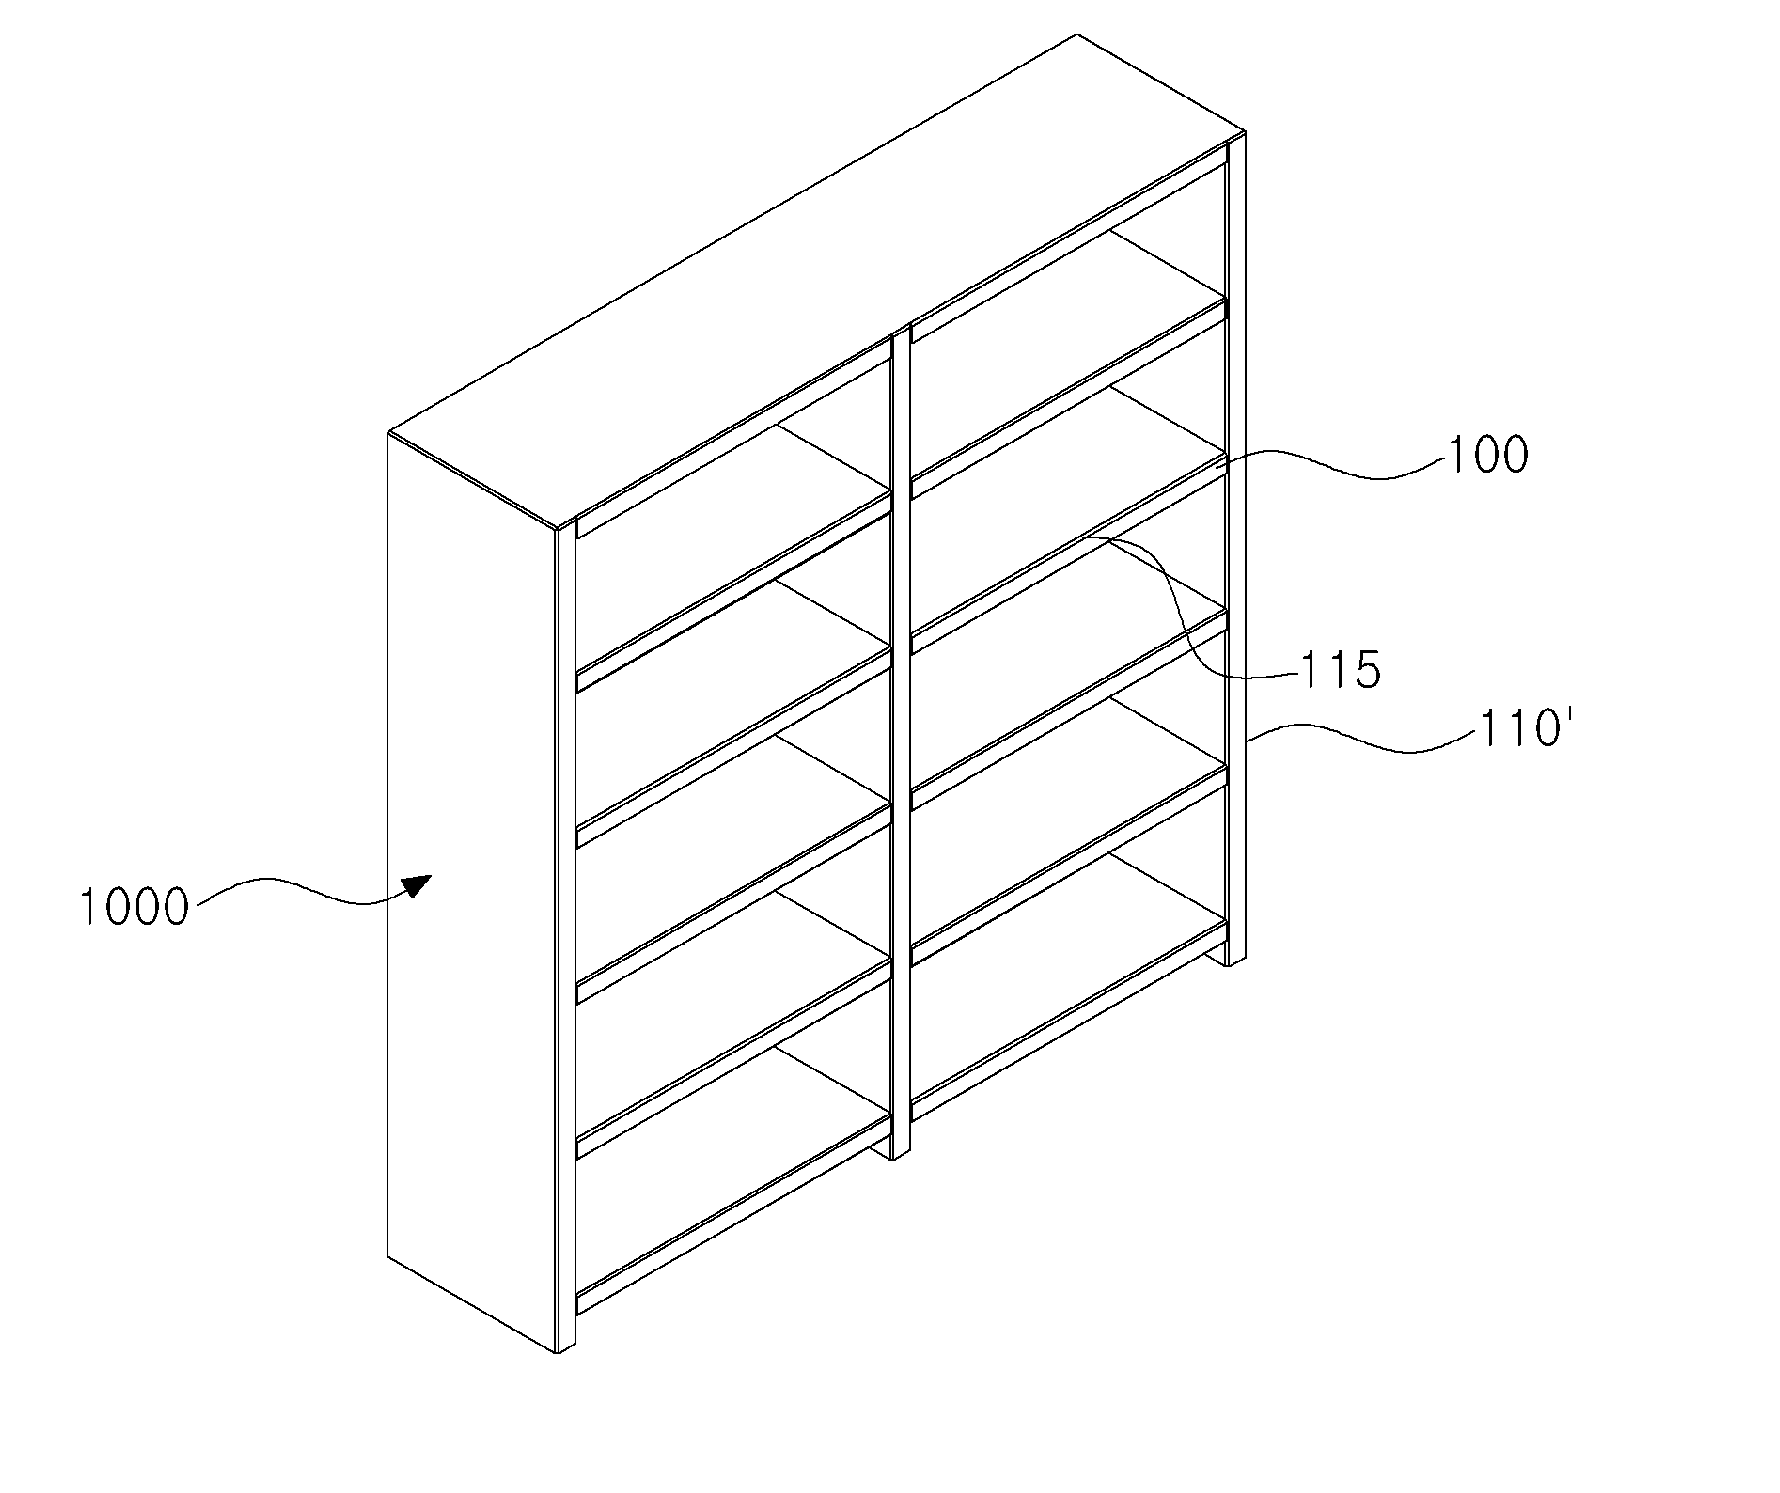 Panel and bookcase assembly using the same